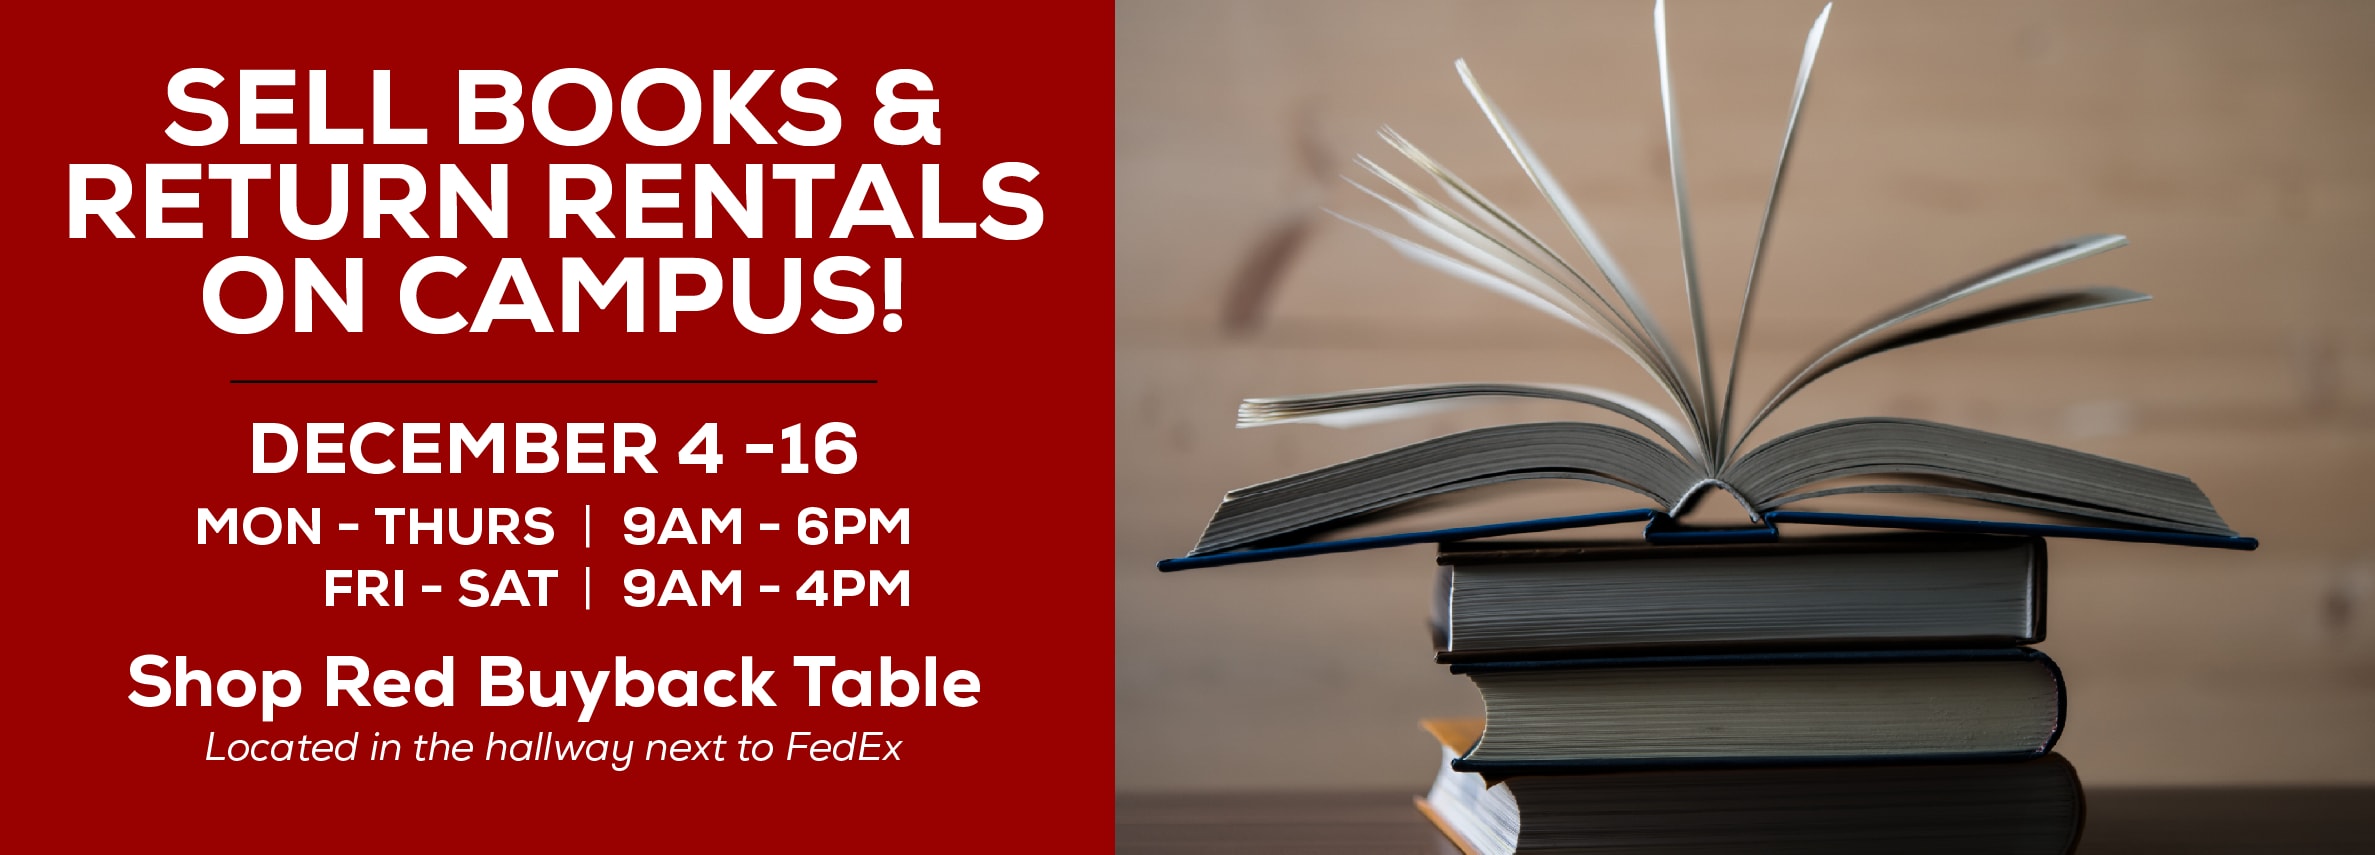 Sell books and return rentals on campus! December 4 - 16. Monday through Thursday, 9am to 6pm. Friday through Saturday, 9am to 4pm. Shop Red Buyback Table. Located in the hallway next to FedEx.